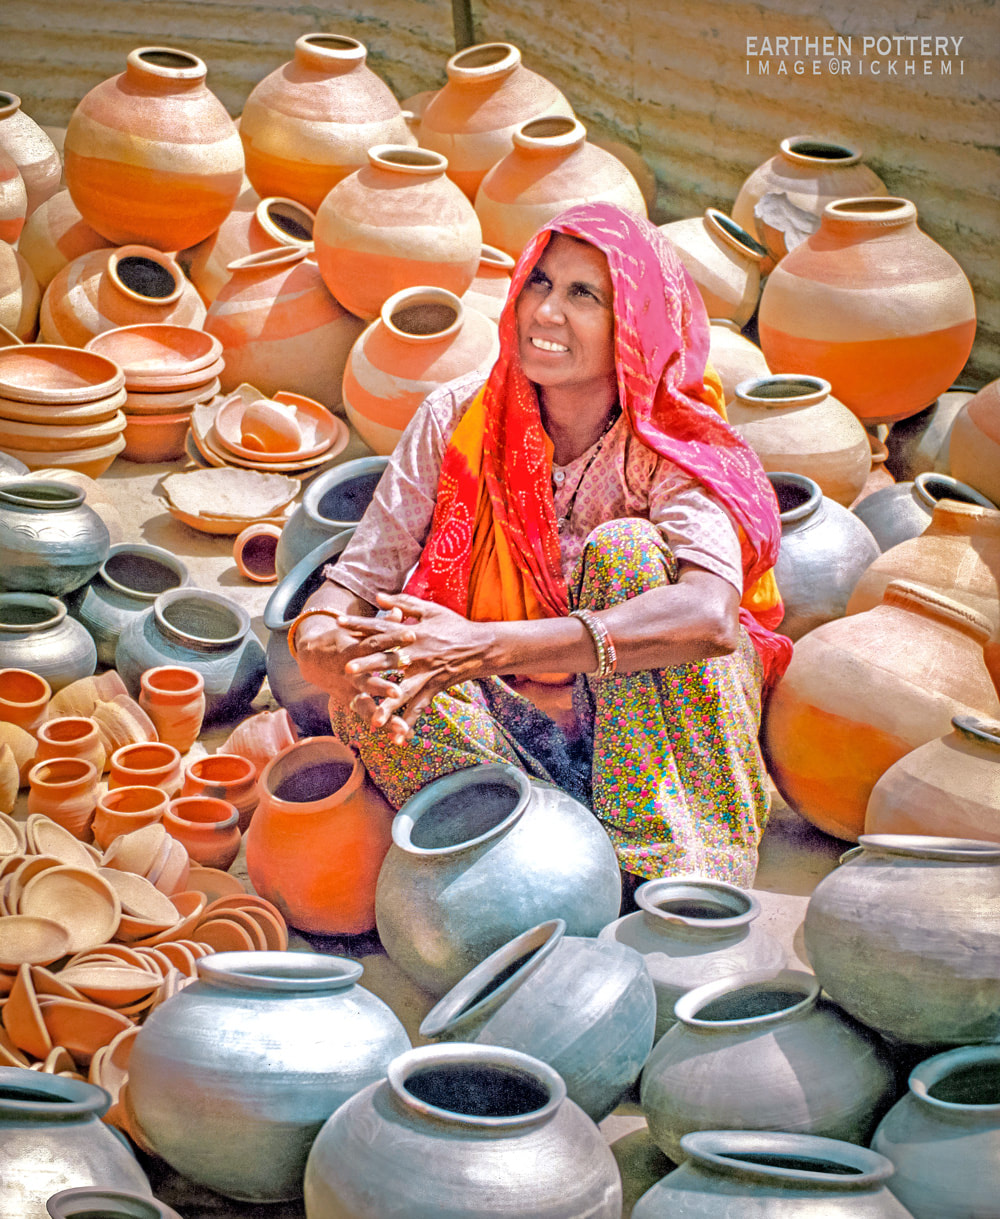 solo travel overland India, earthen pottery India, vases and pottery India, image by Rick Hemi